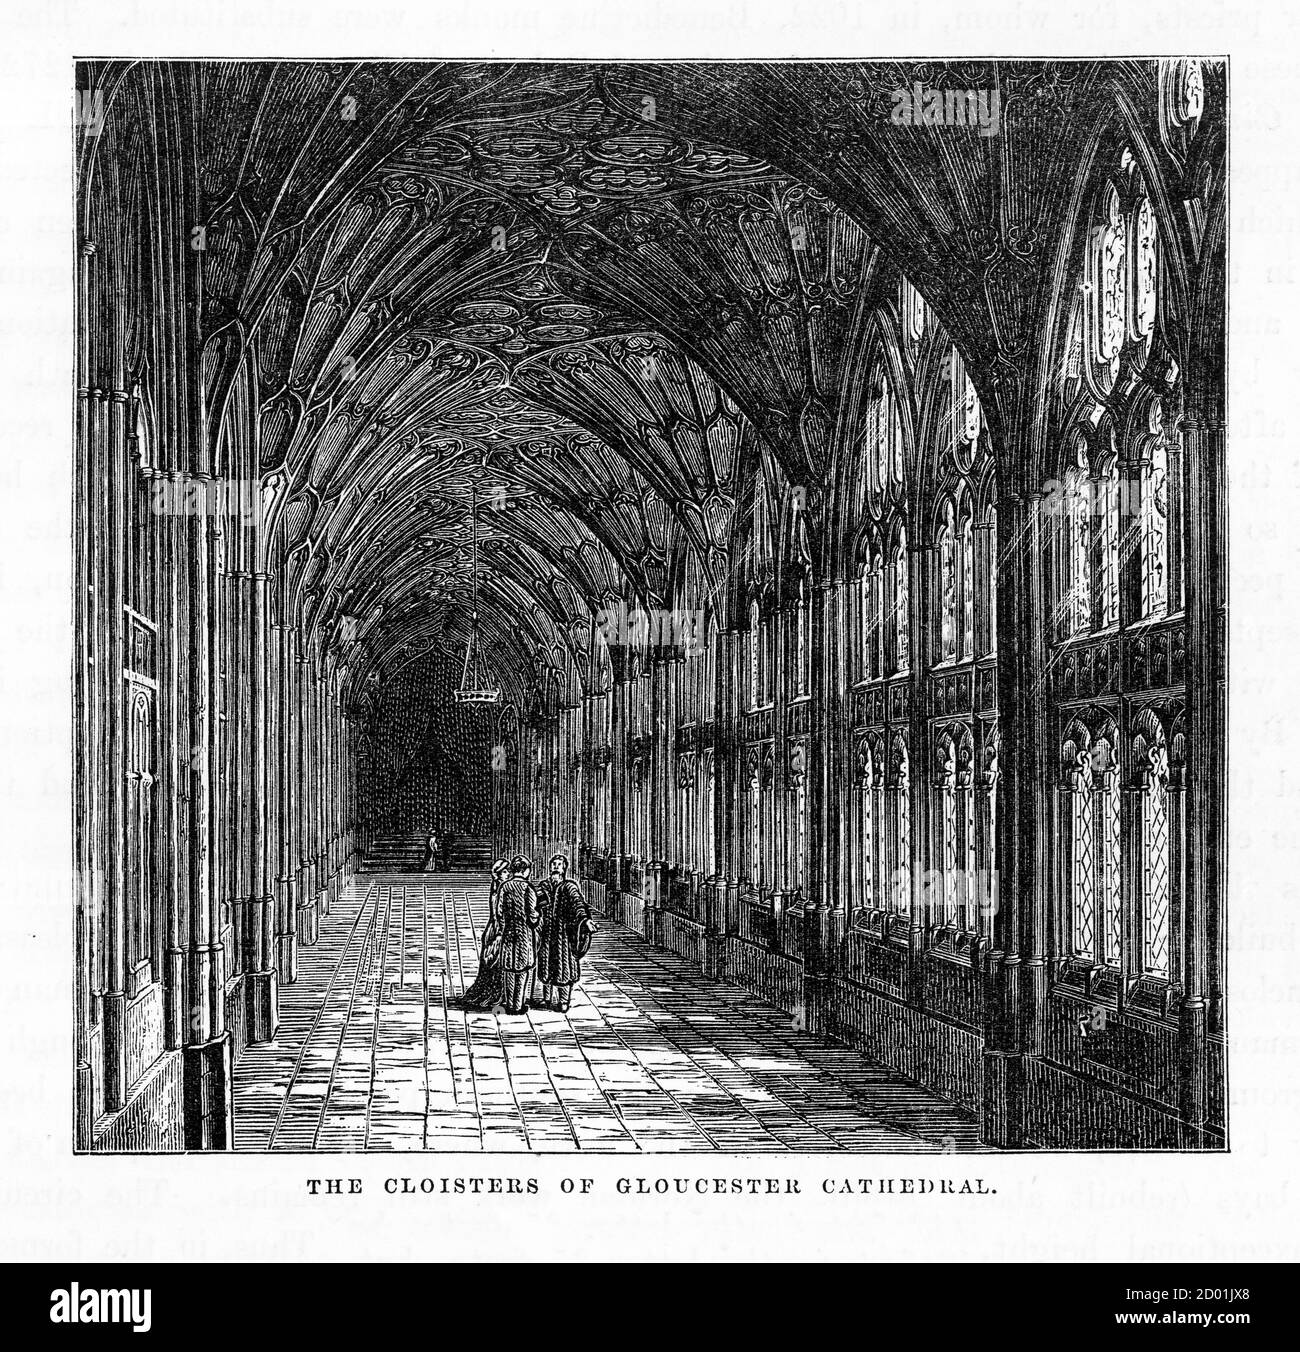 Cloisters of Gloucester Cathedral, Gloucestershire, England Victorian Engraving, 1840 Stock Photo